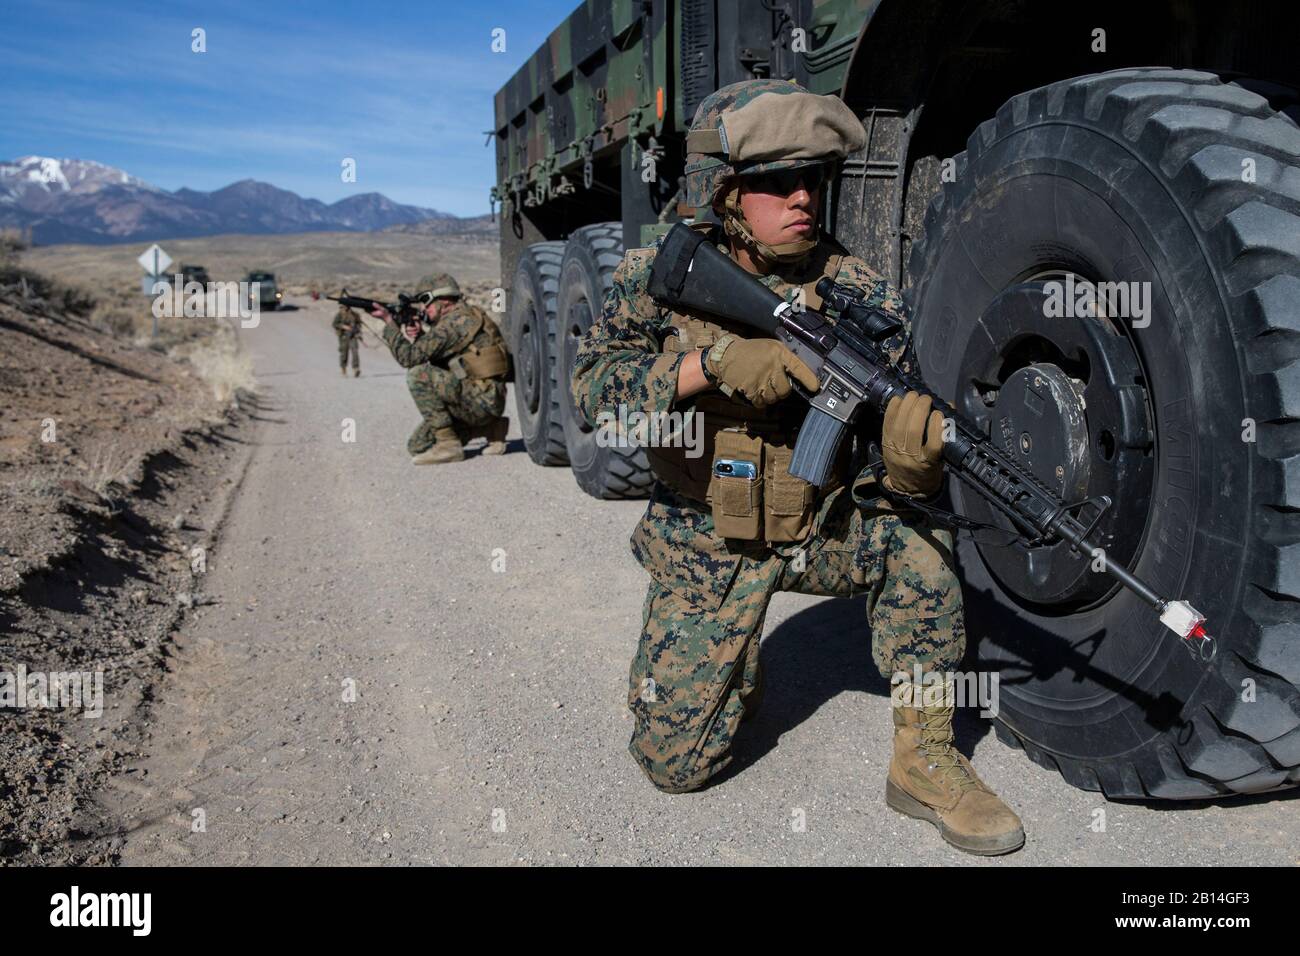 U.S. Marine Corps Lance Cpl. Caleb Estrada, right, a landing support specialist with 2nd Transportation Support Battalion, Combat Logistics Regiment 25, 2nd Marine Logistics Group, provides security for a convoy during improvised explosive device training at Luck Boy Pass Training Area, Marine Corps Mountain Warfare Training Center, Bridgeport, Calif., Feb. 9, 2018. Marines with CLR-25 took part in mountainous tactical convoy training designed to provide the Marines experience in IED recognition, navigation in mountainous terrain, enemy contact drills, and casualty treatment and evacuation. (U Stock Photo